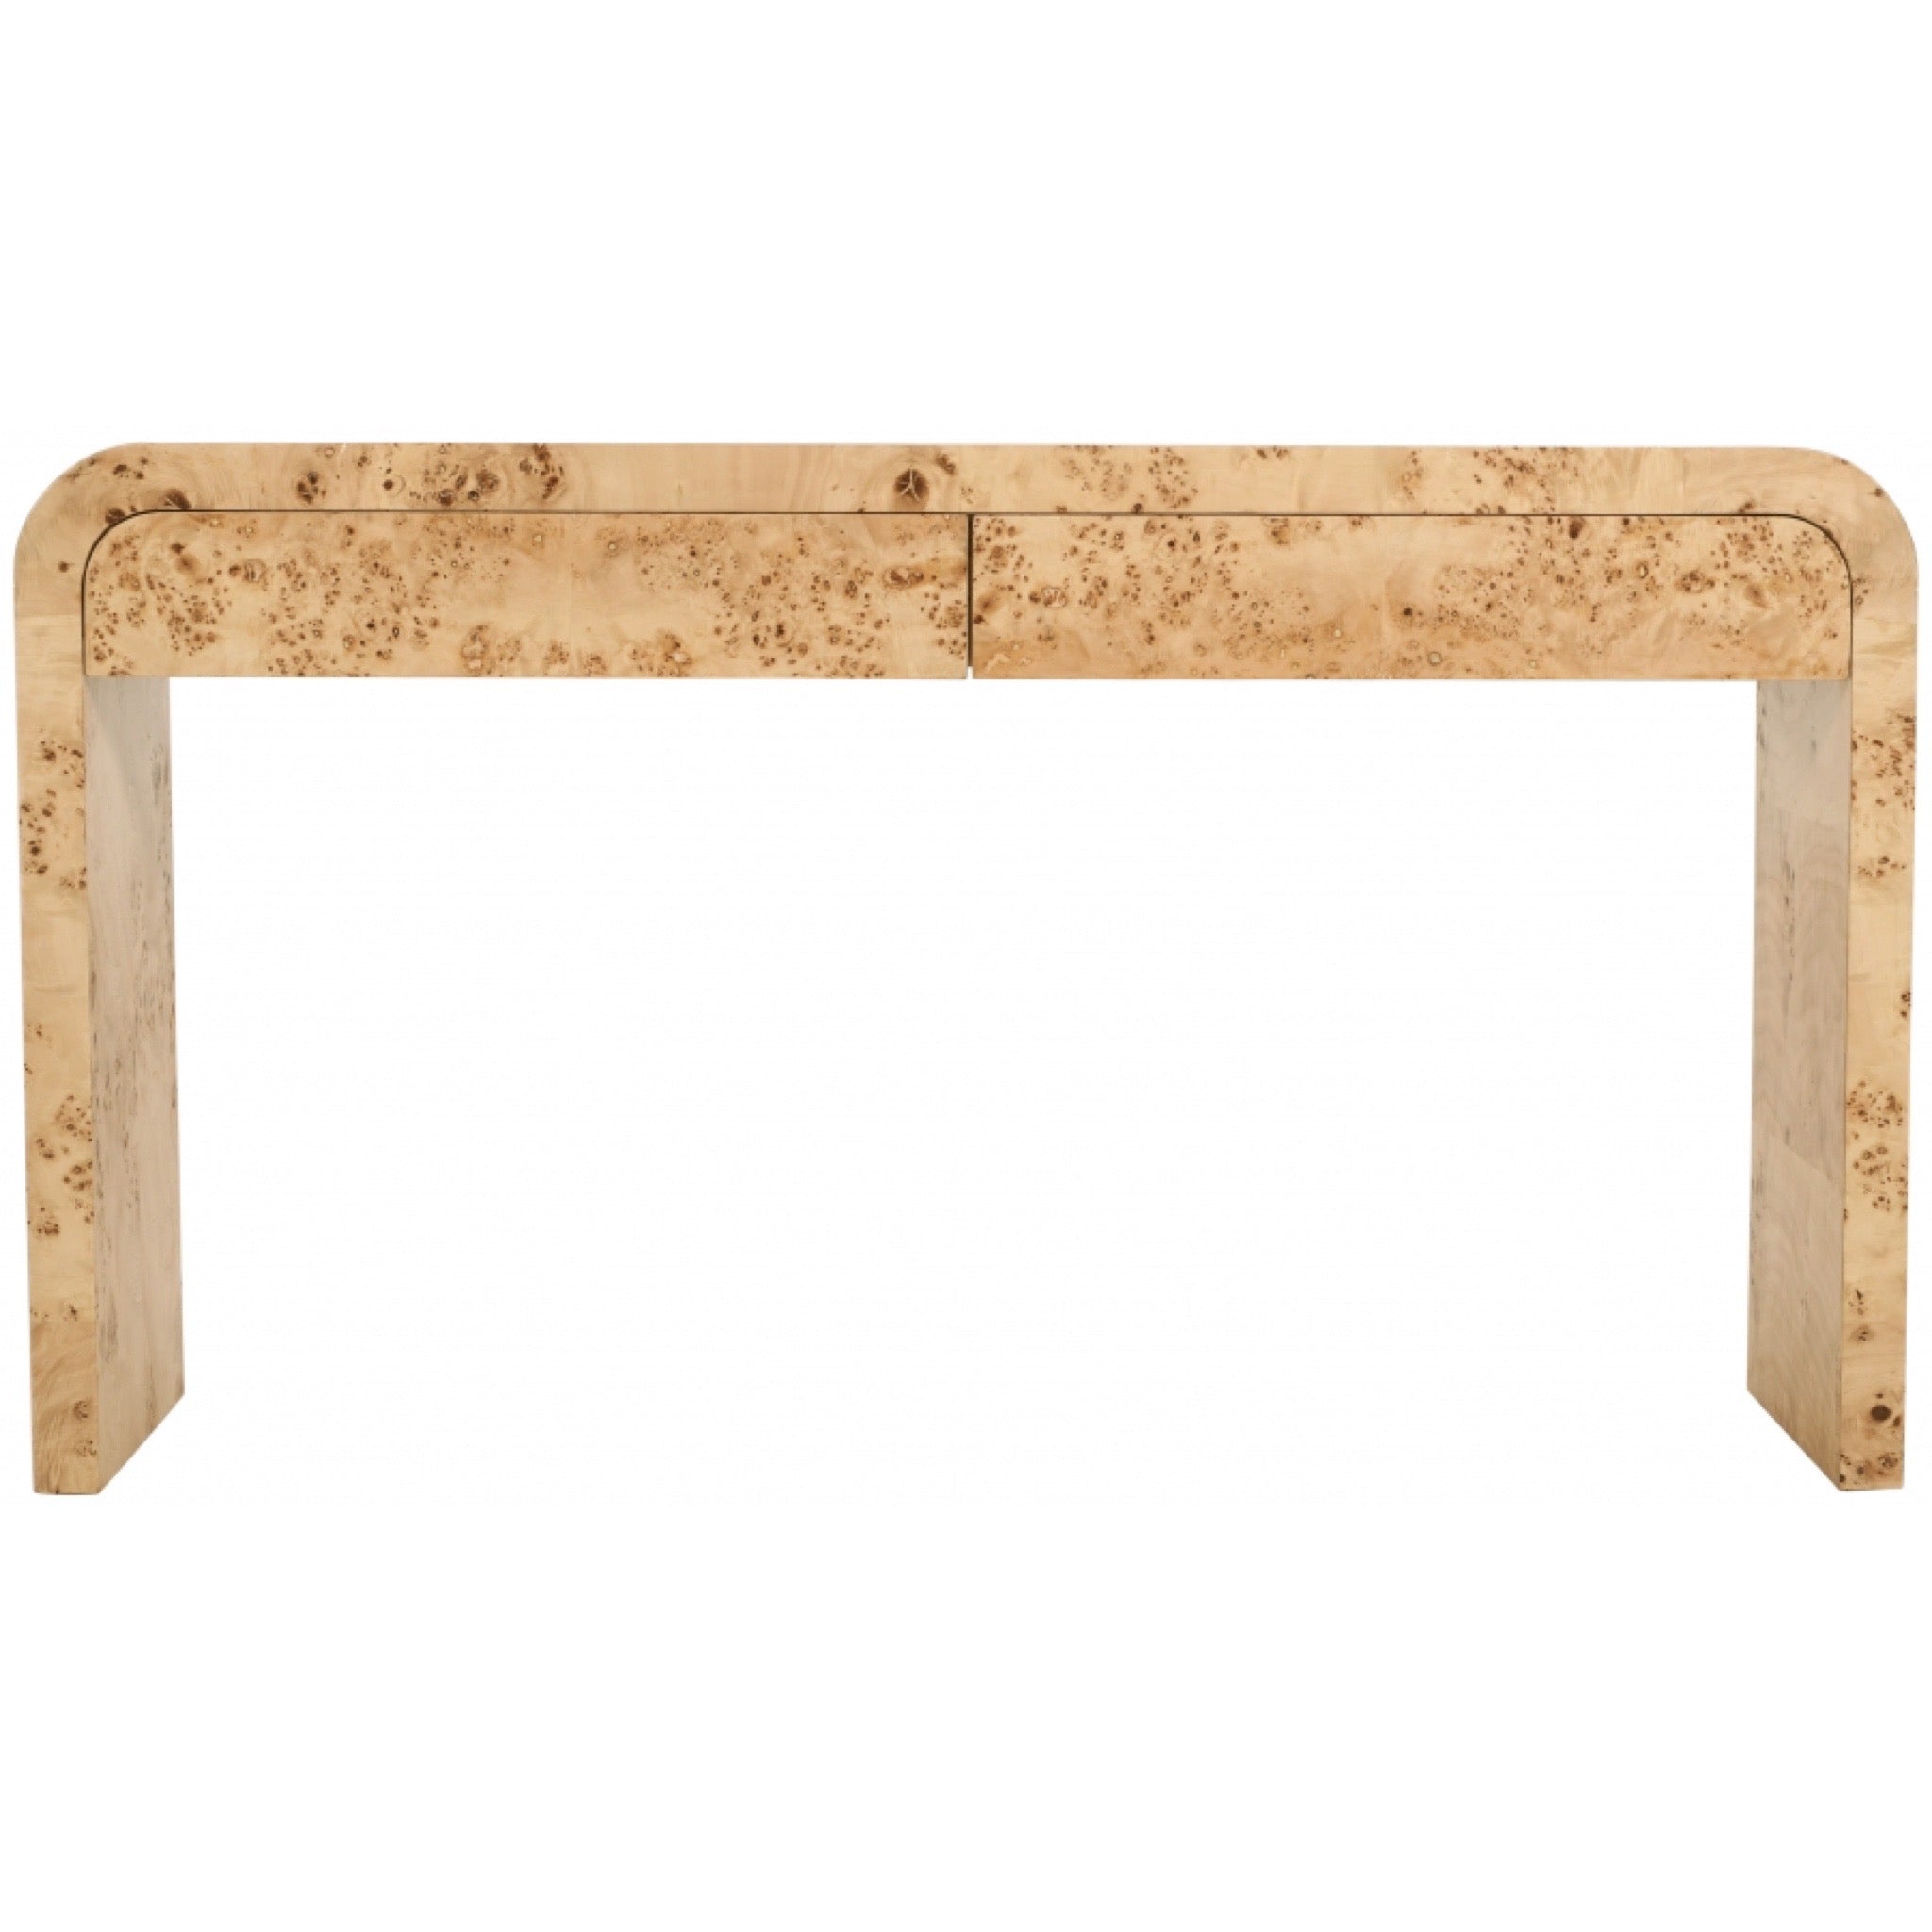 Cresthill Console Table - Natural Ash